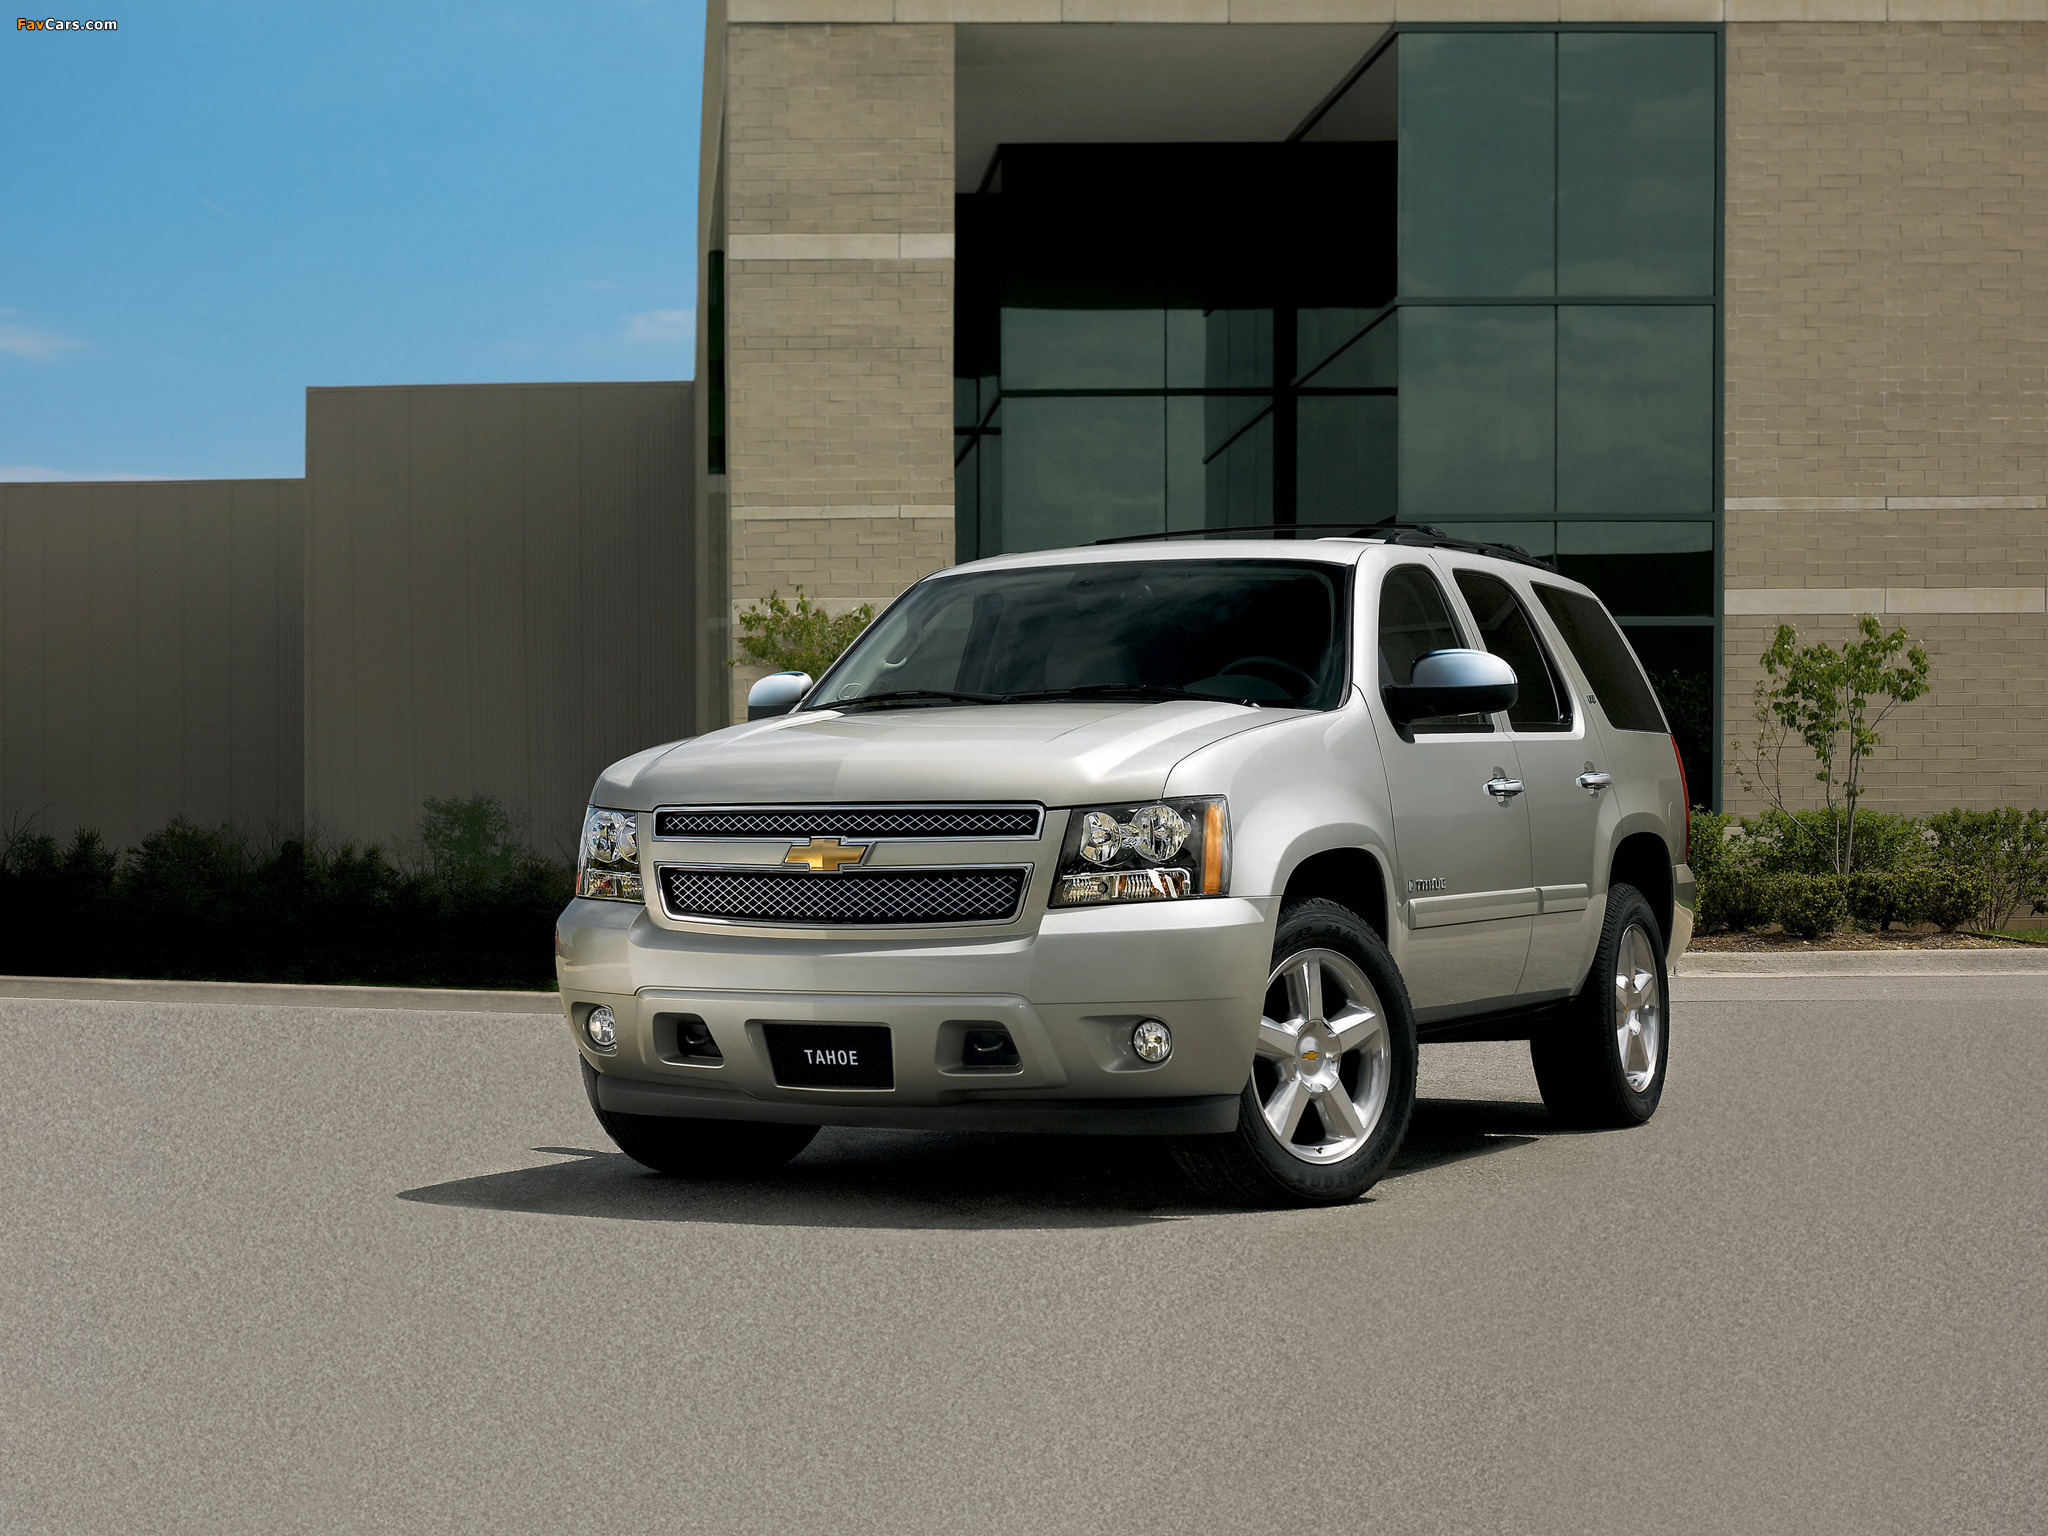 Chevrolet Tahoe (GMT900) 2006 pictures (2048 x 1536)